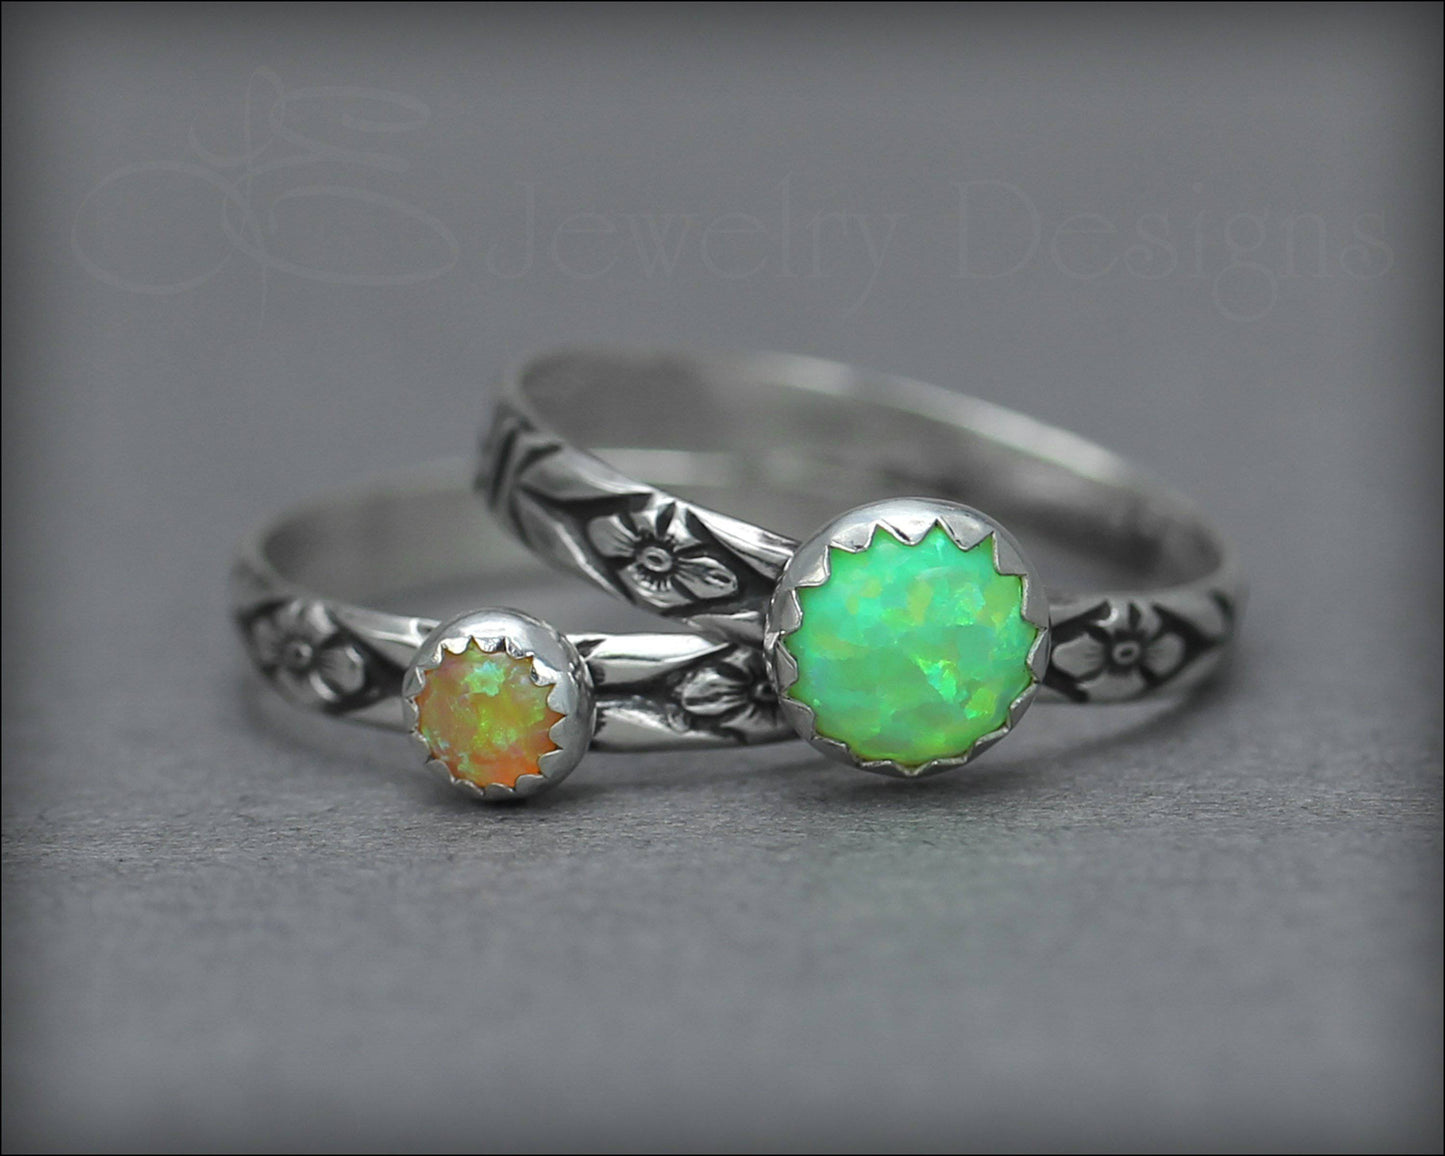 Floral Opal Ring Set (6mm & 4mm opal) - LE Jewelry Designs